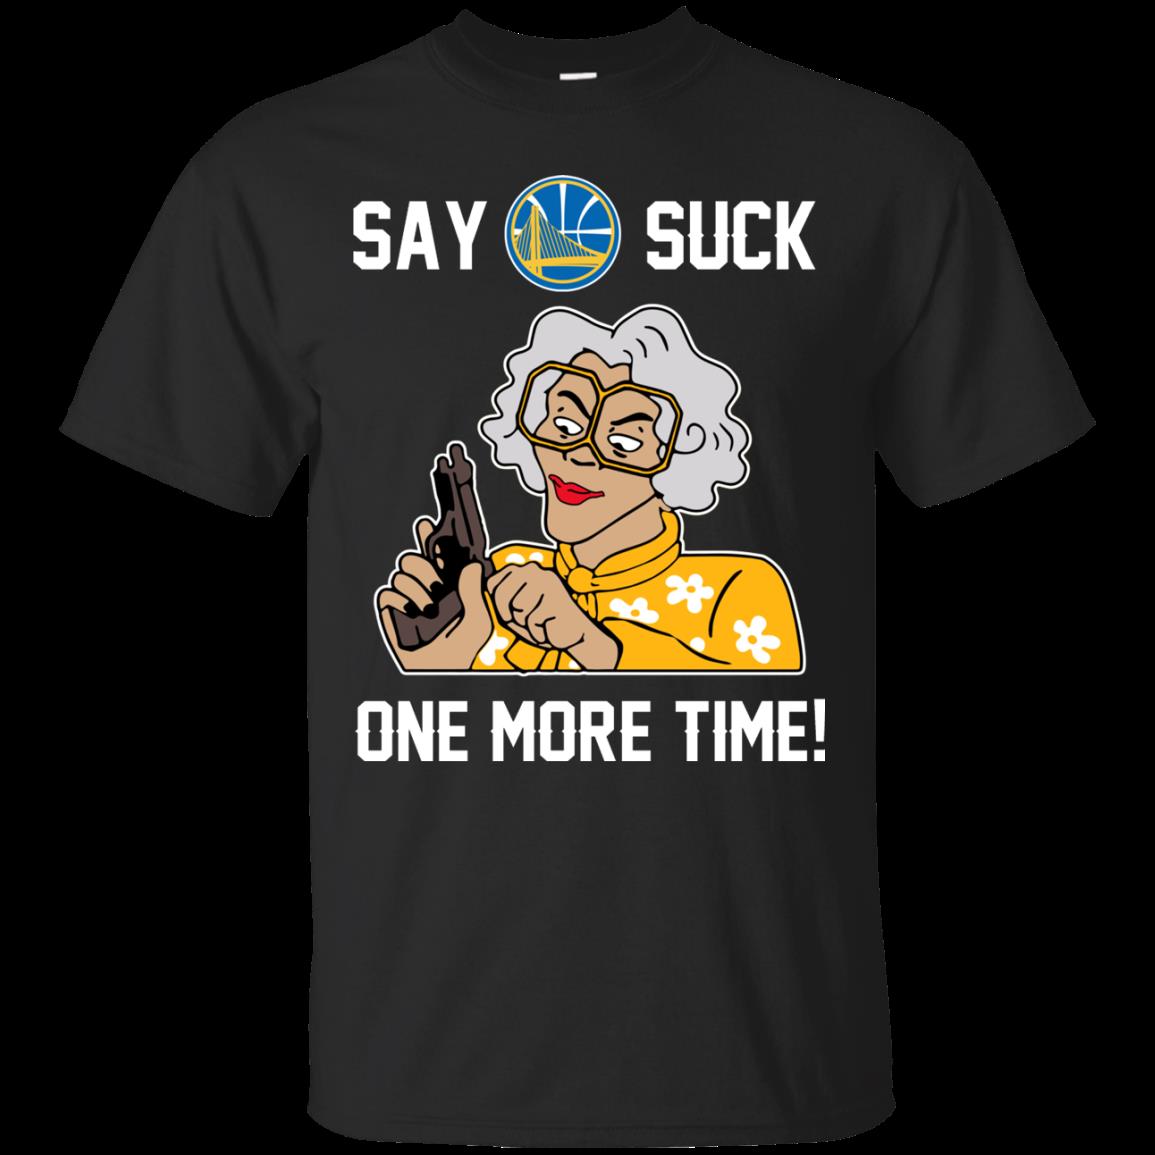 Golden State Warriors Madea Shirts Say It One More Time